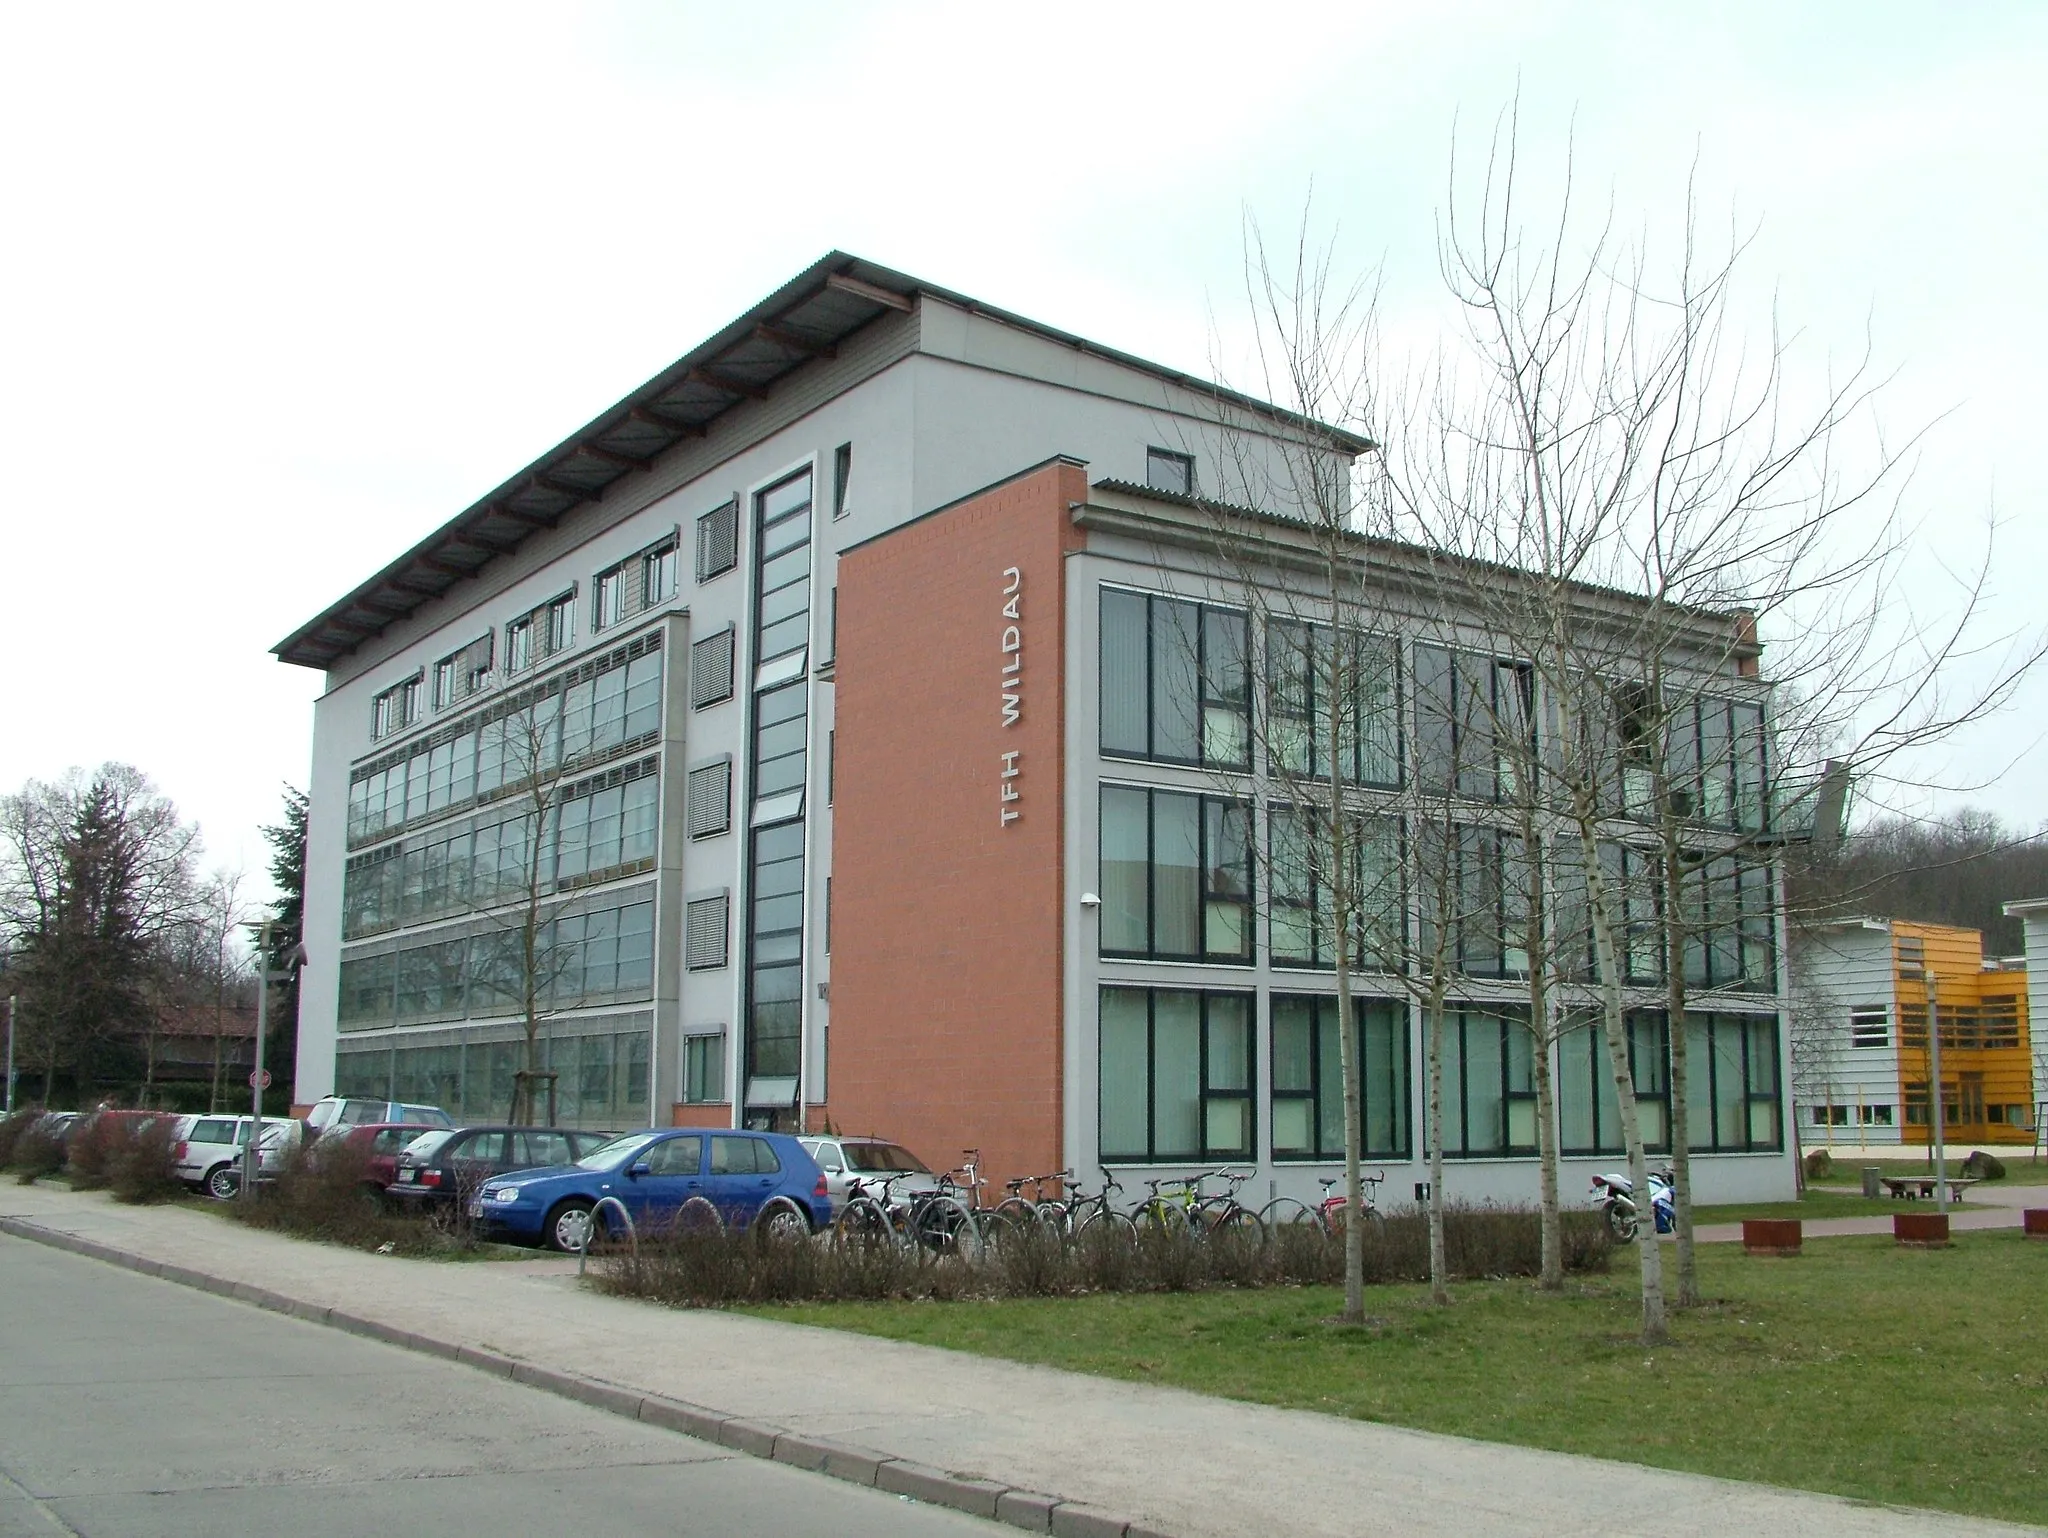 Photo showing: The University of Applied Sciences Wildau, Germany